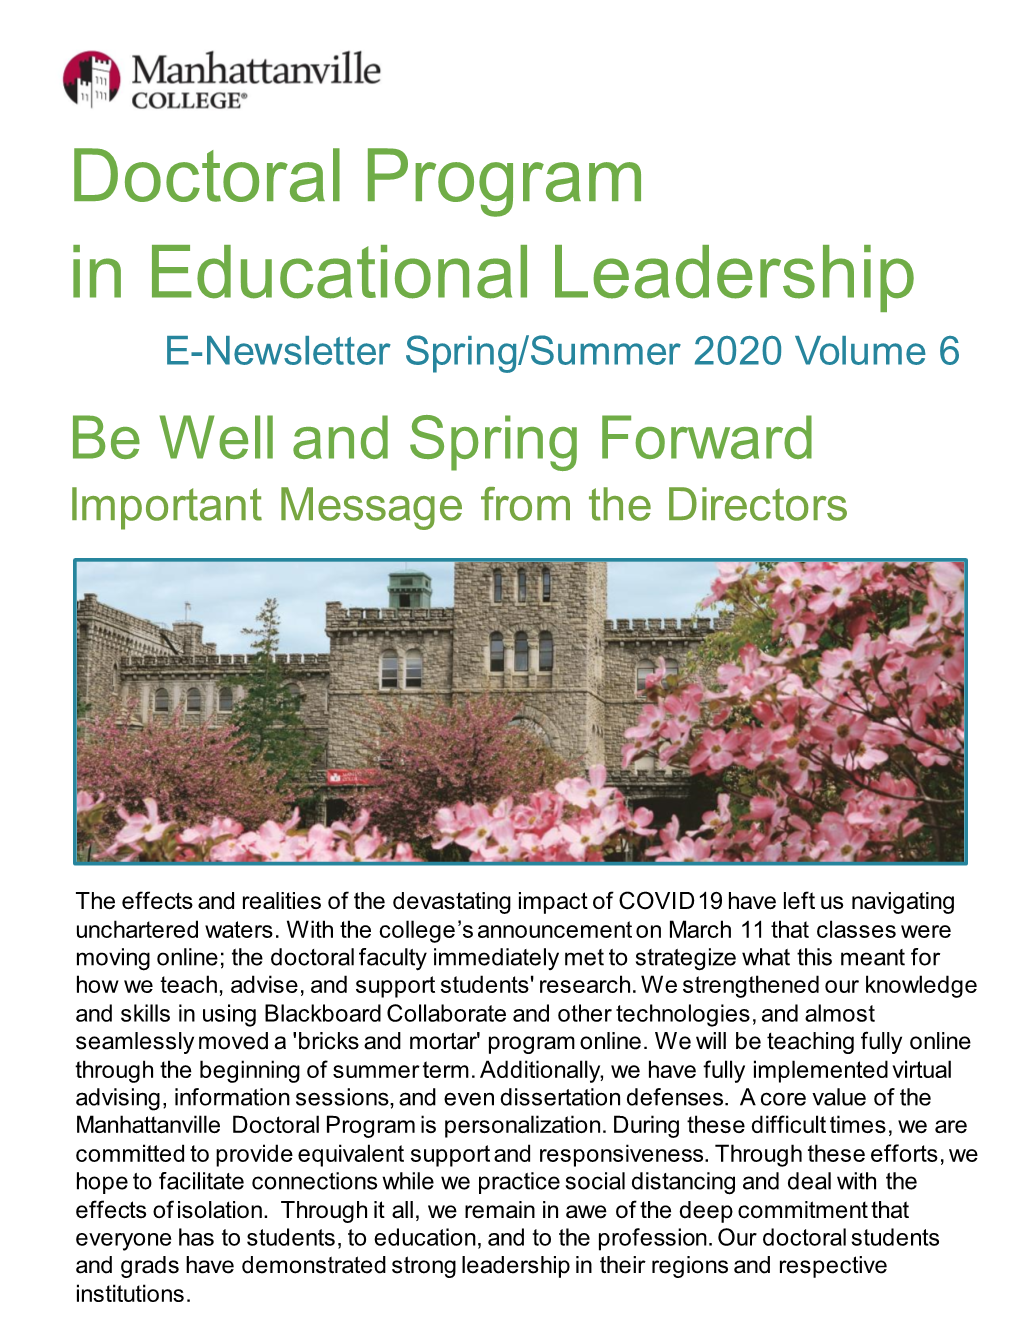 Doctoral Program in Educational Leadership E-Newsletter Spring/Summer 2020 Volume 6 Be Well and Spring Forward Important Message from the Directors